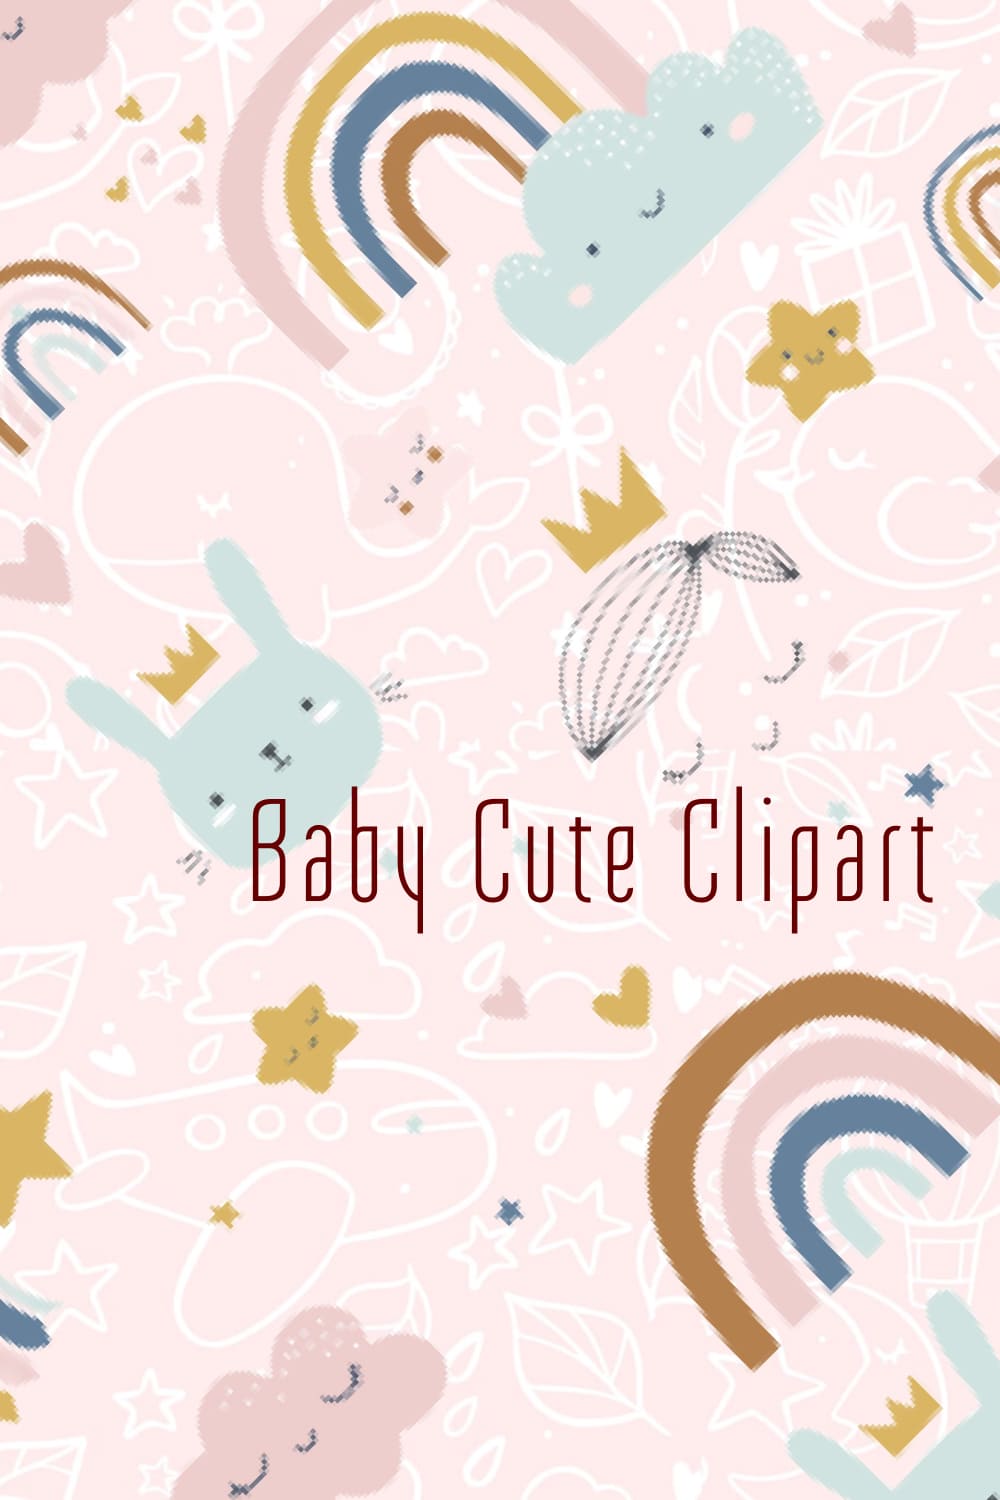 Baby Cute Clipart - Pinterest Image Preview.